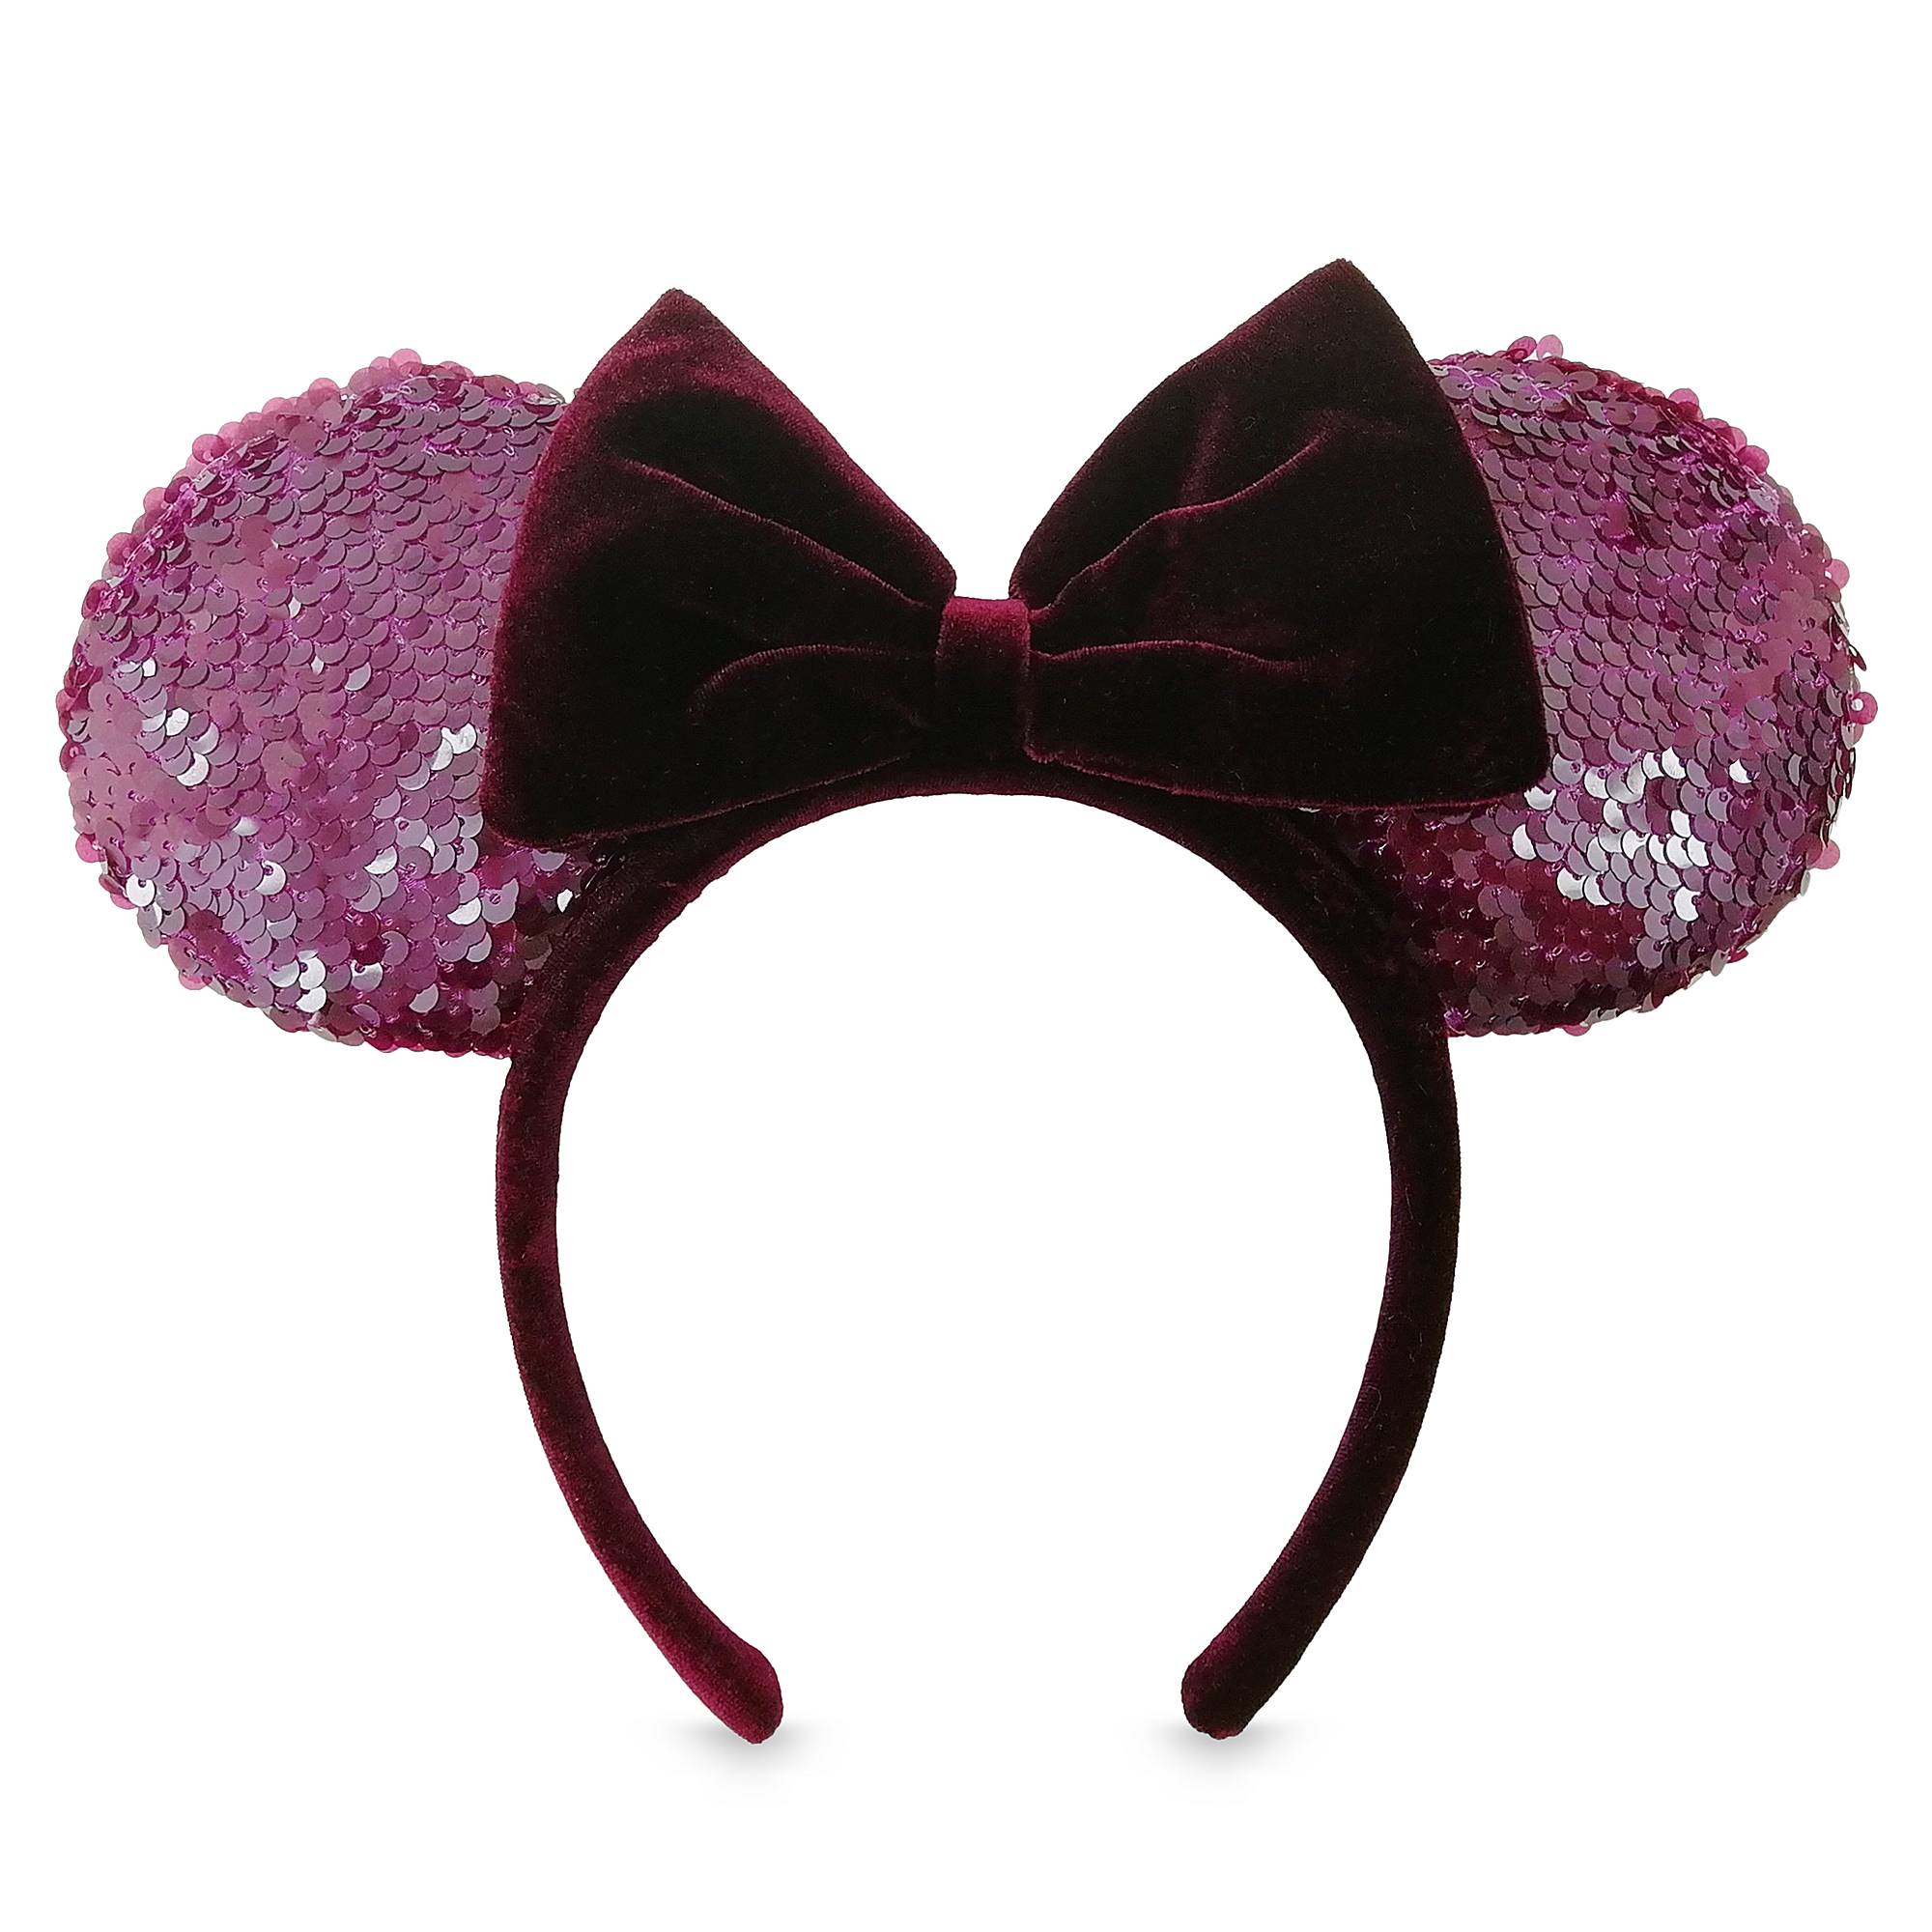 Minnie Mouse Sequined Ear Headband with Velvet Bow – Bordeaux image